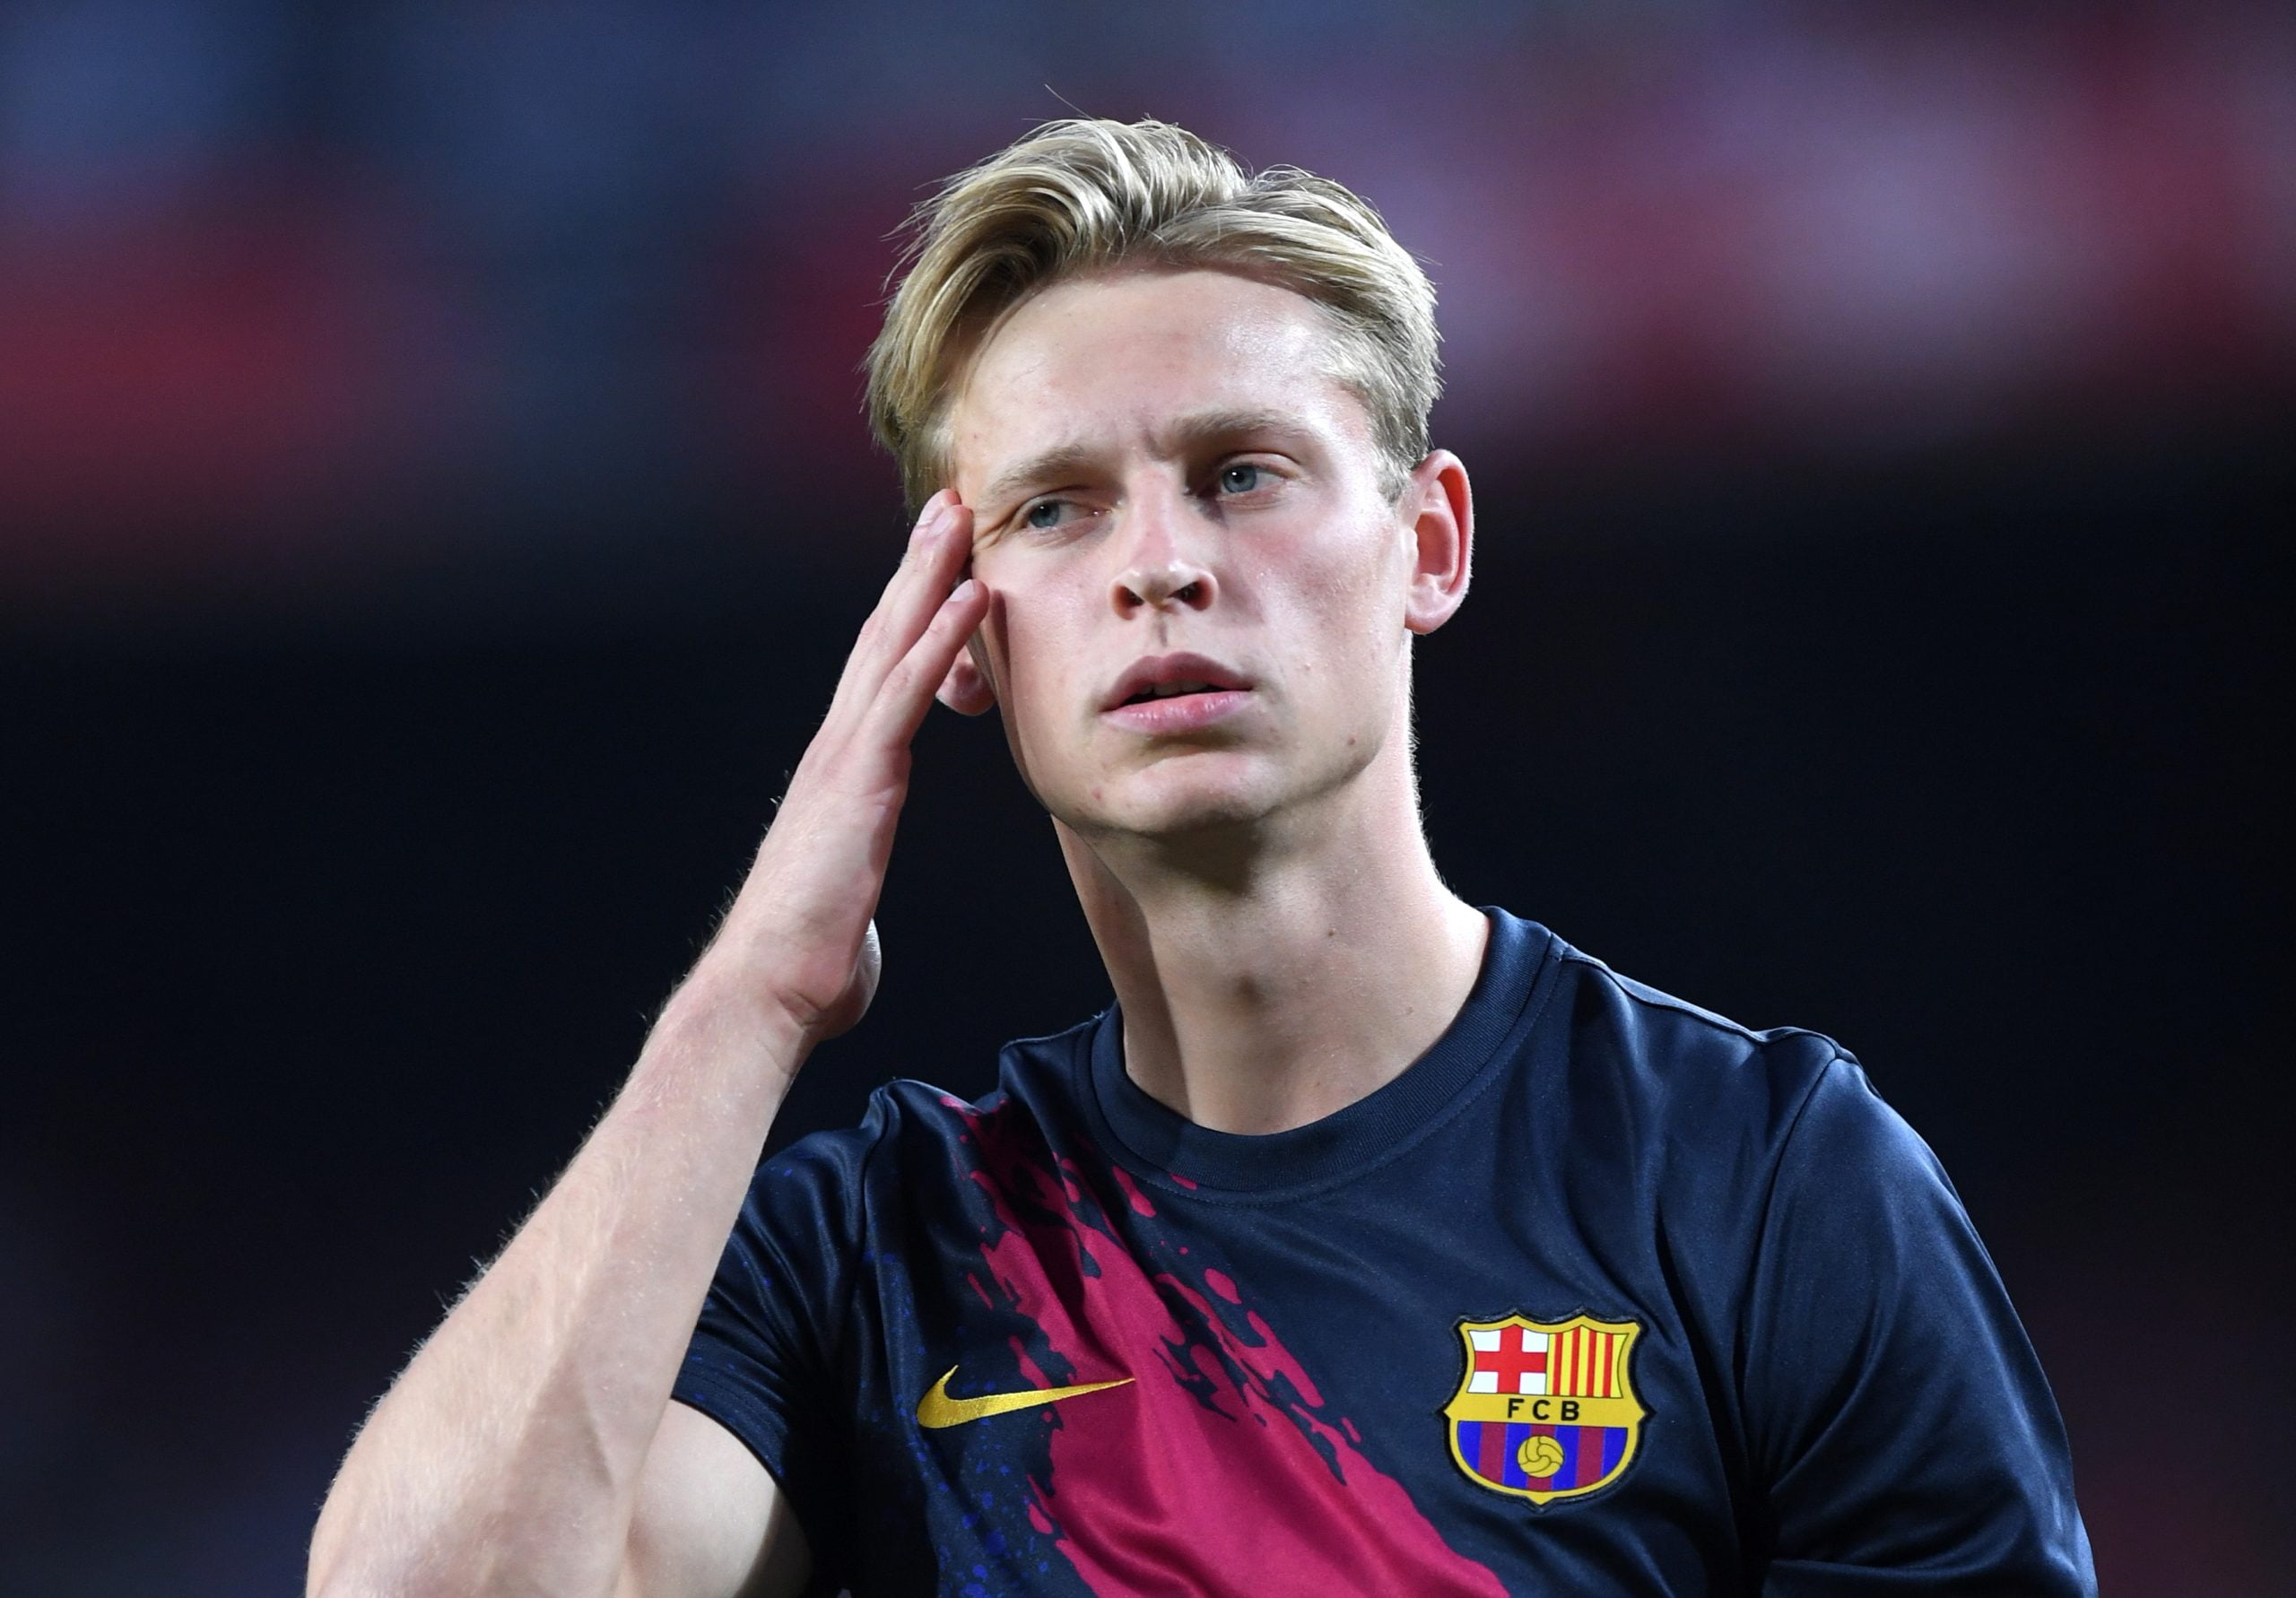 BARCELONA, SPAIN - AUGUST 25: Frenkie De Jong of Barcelona looks on prior to the Liga match between FC Barcelona and Real Betis at Camp Nou on August 25, 2019 in Barcelona, Spain. (Photo by Alex Caparros/Getty Images)